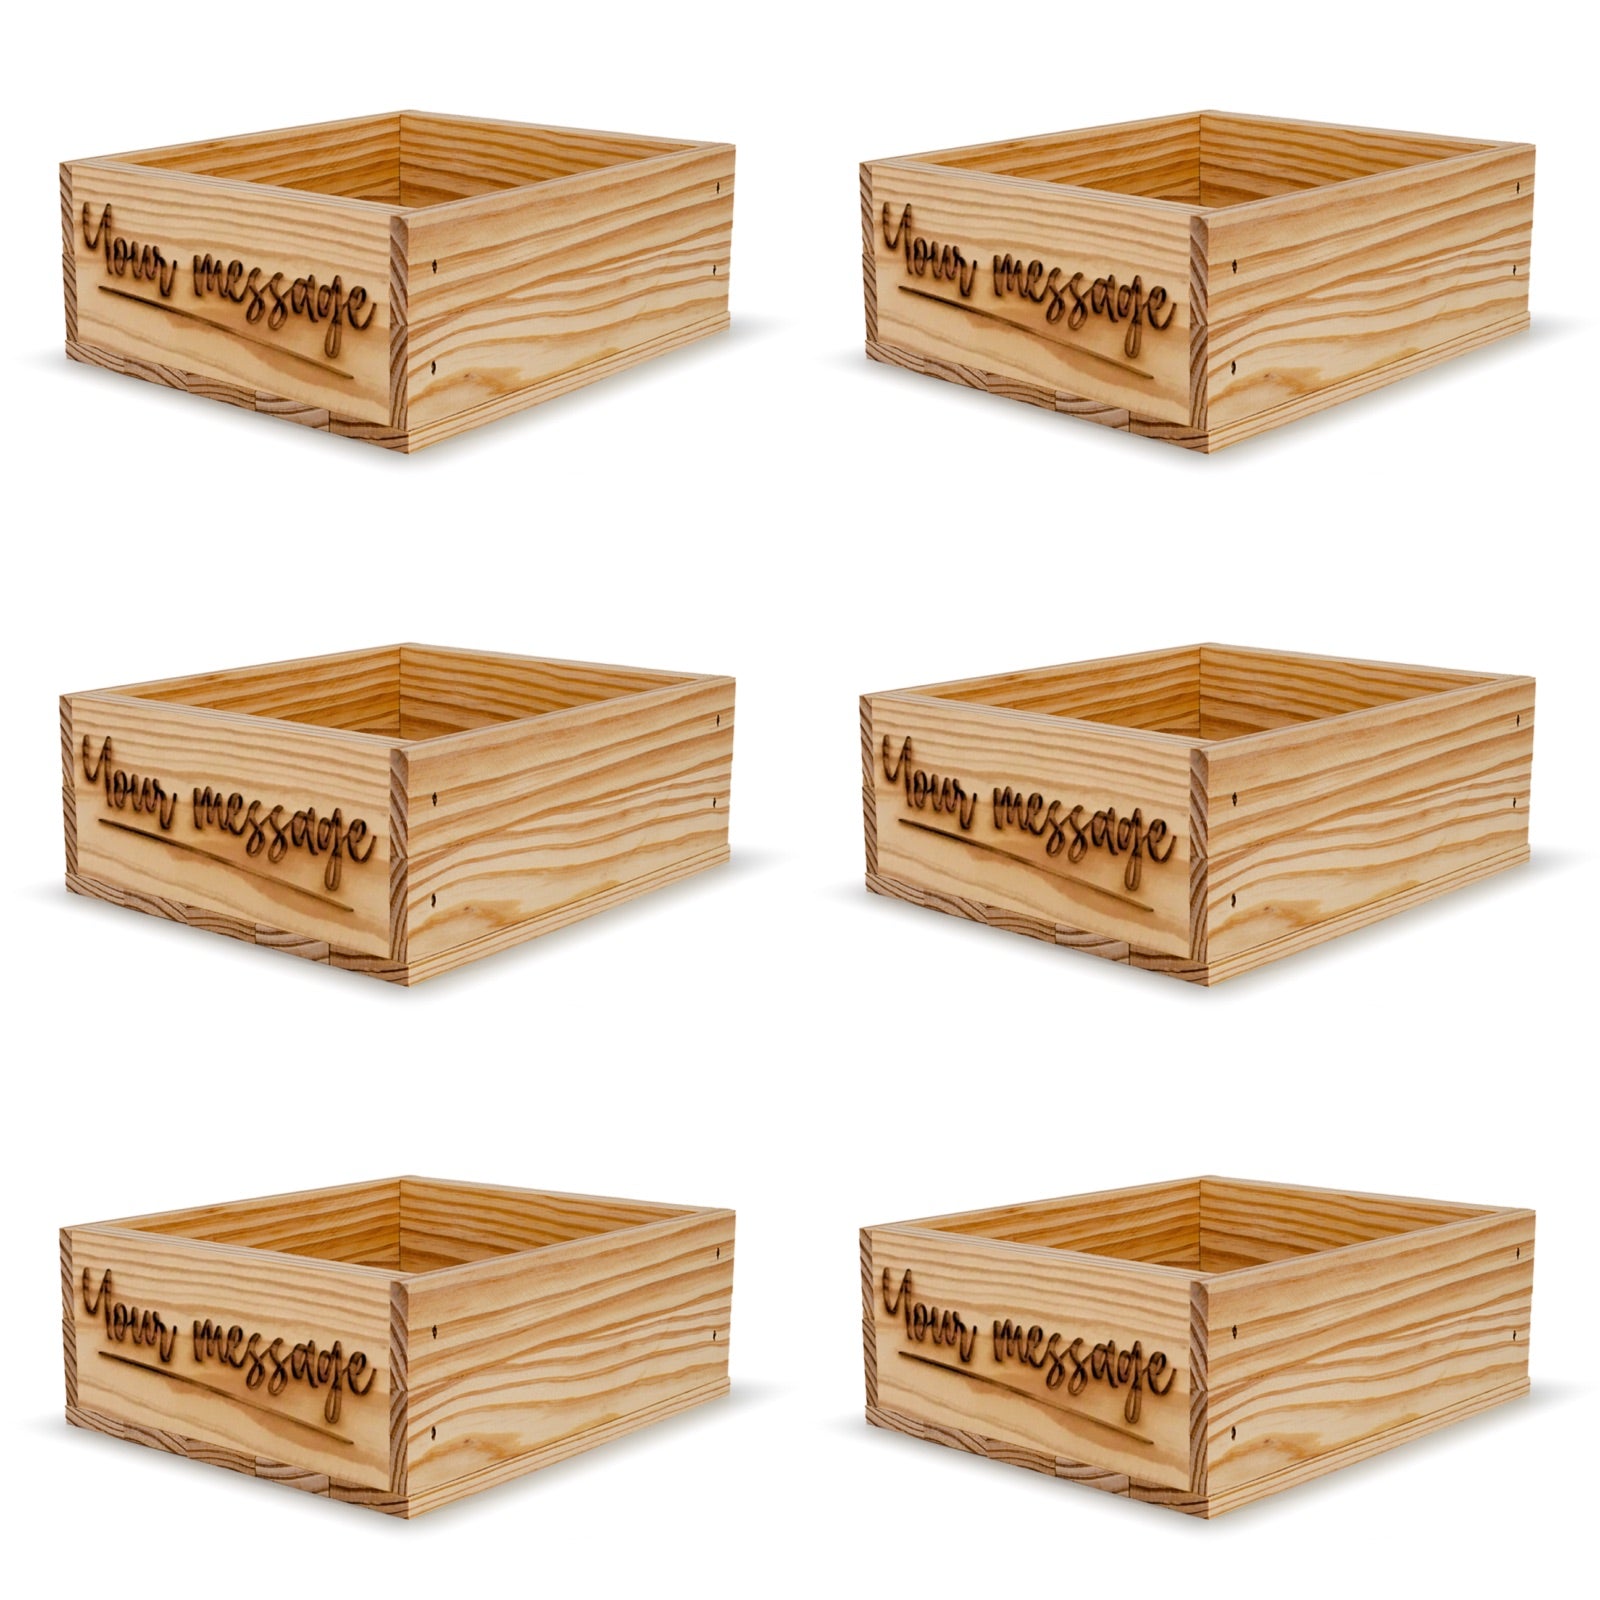 6 Small wooden crates with custom message 9x8x3.5